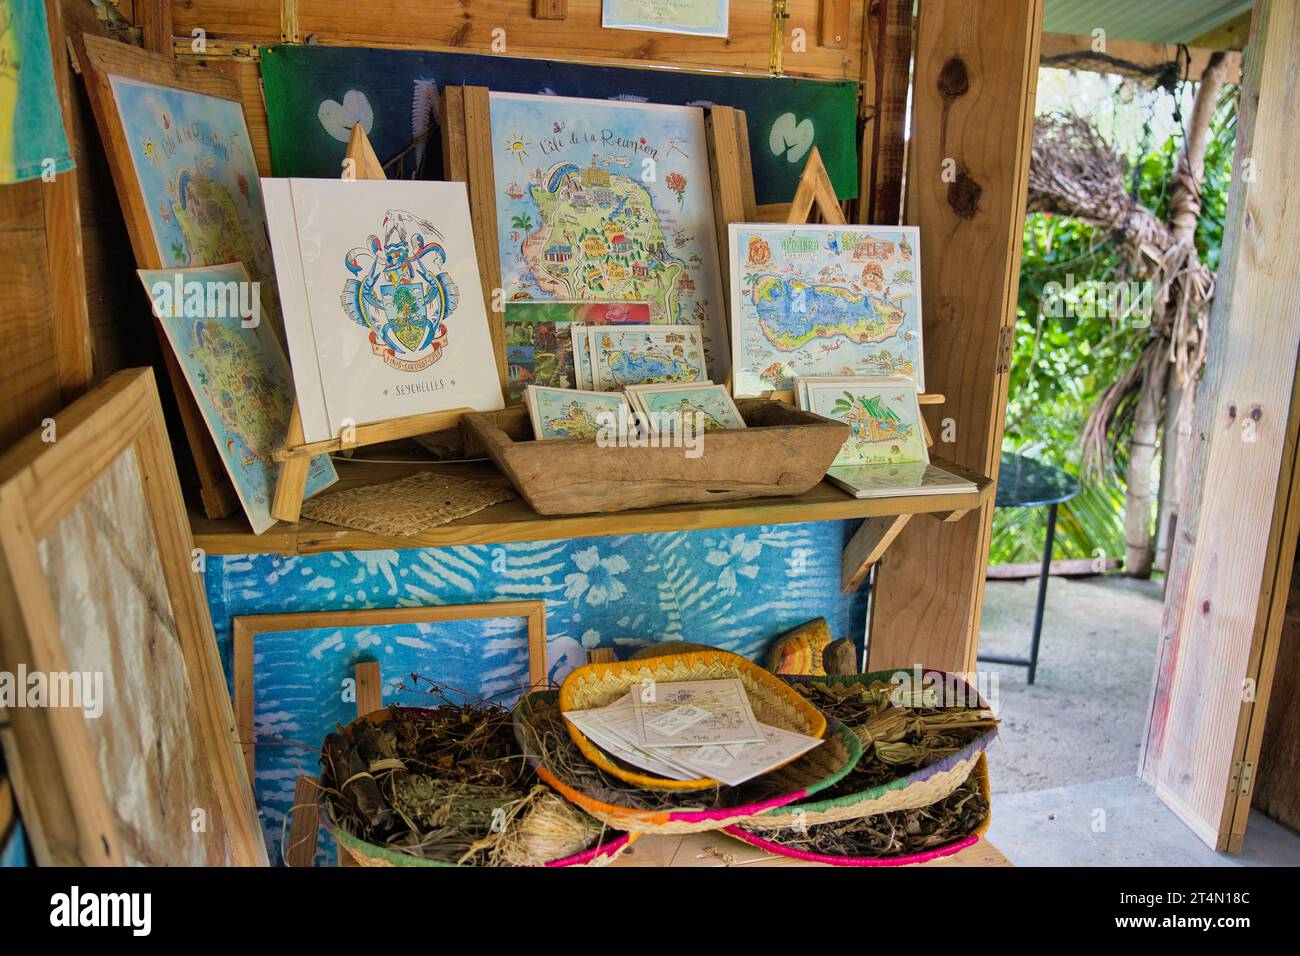 Roots Seychelles, illustration maps in their boutique at their workshop, Mahe Seychelles Stock Photo